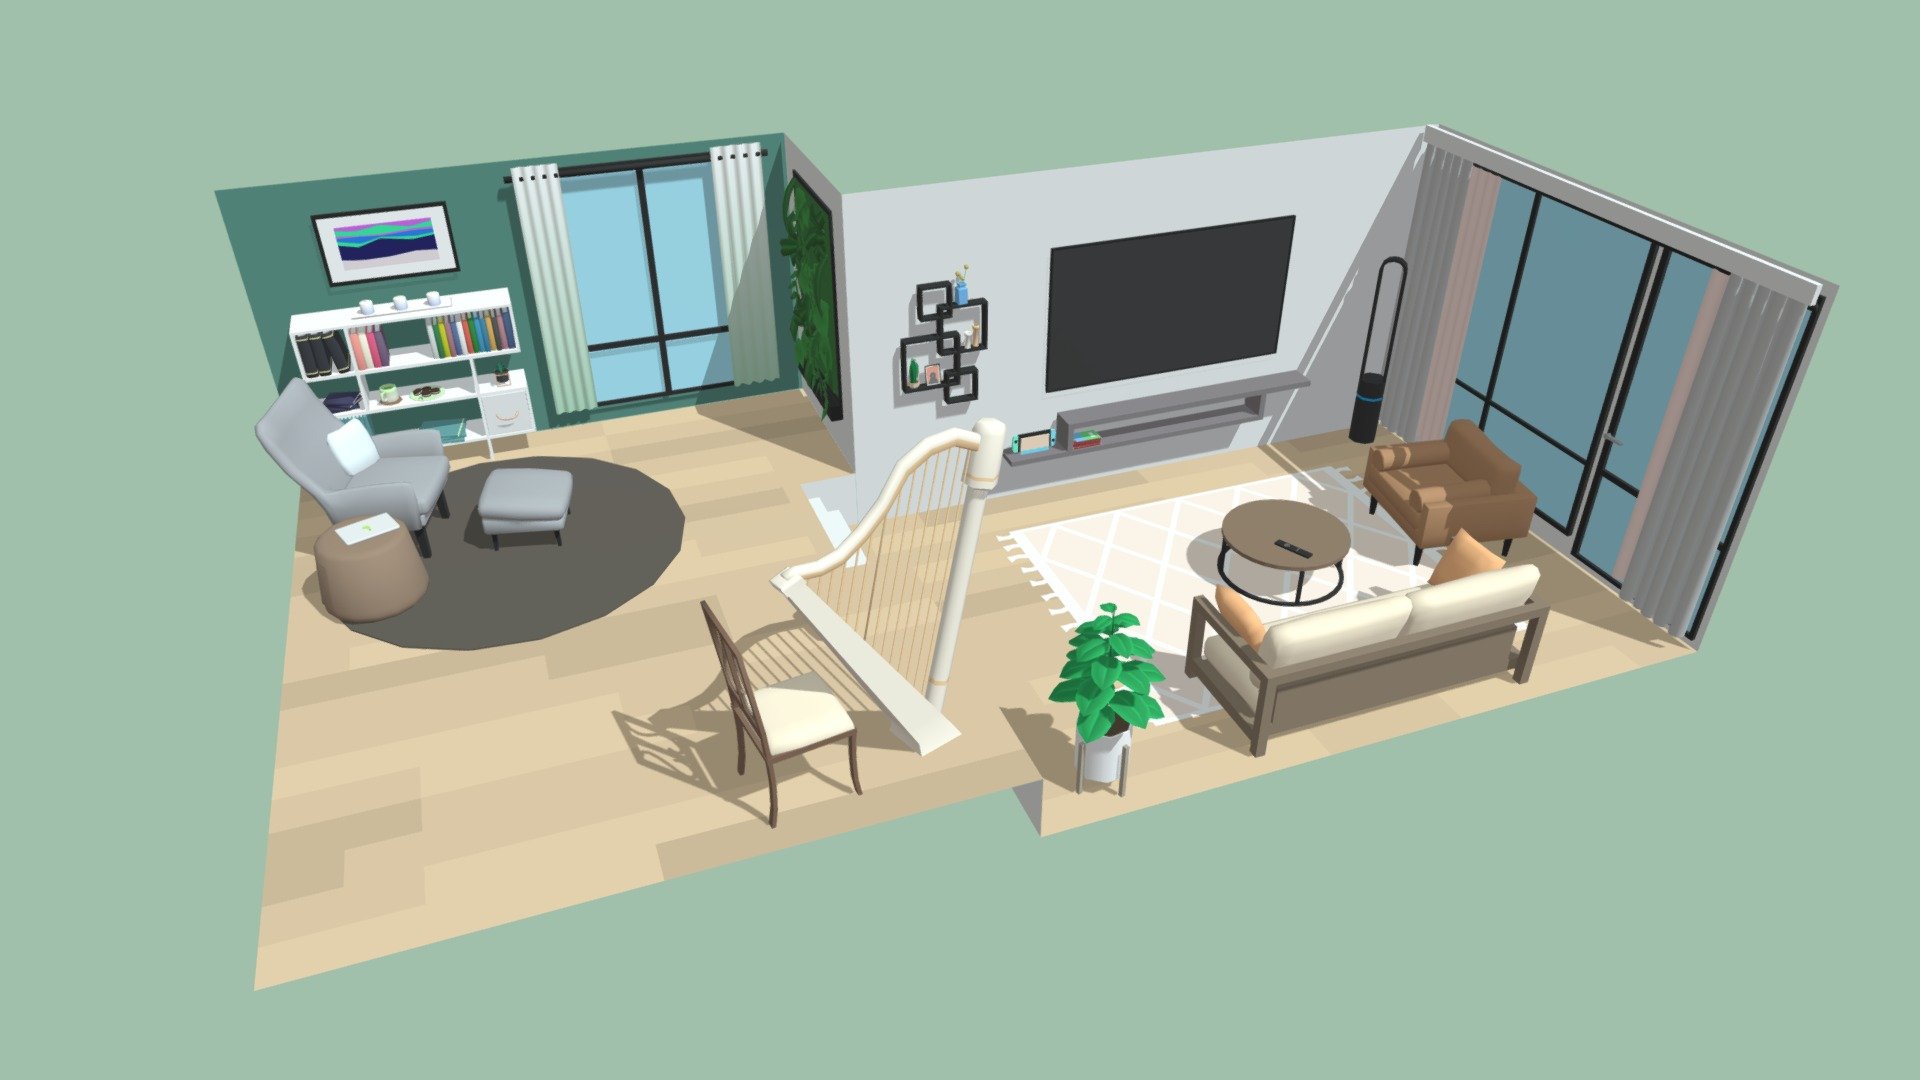 Low poly vertex colored living room
(Various references used from Pinterest) - Living room - 3D model by Cakedown 3d model